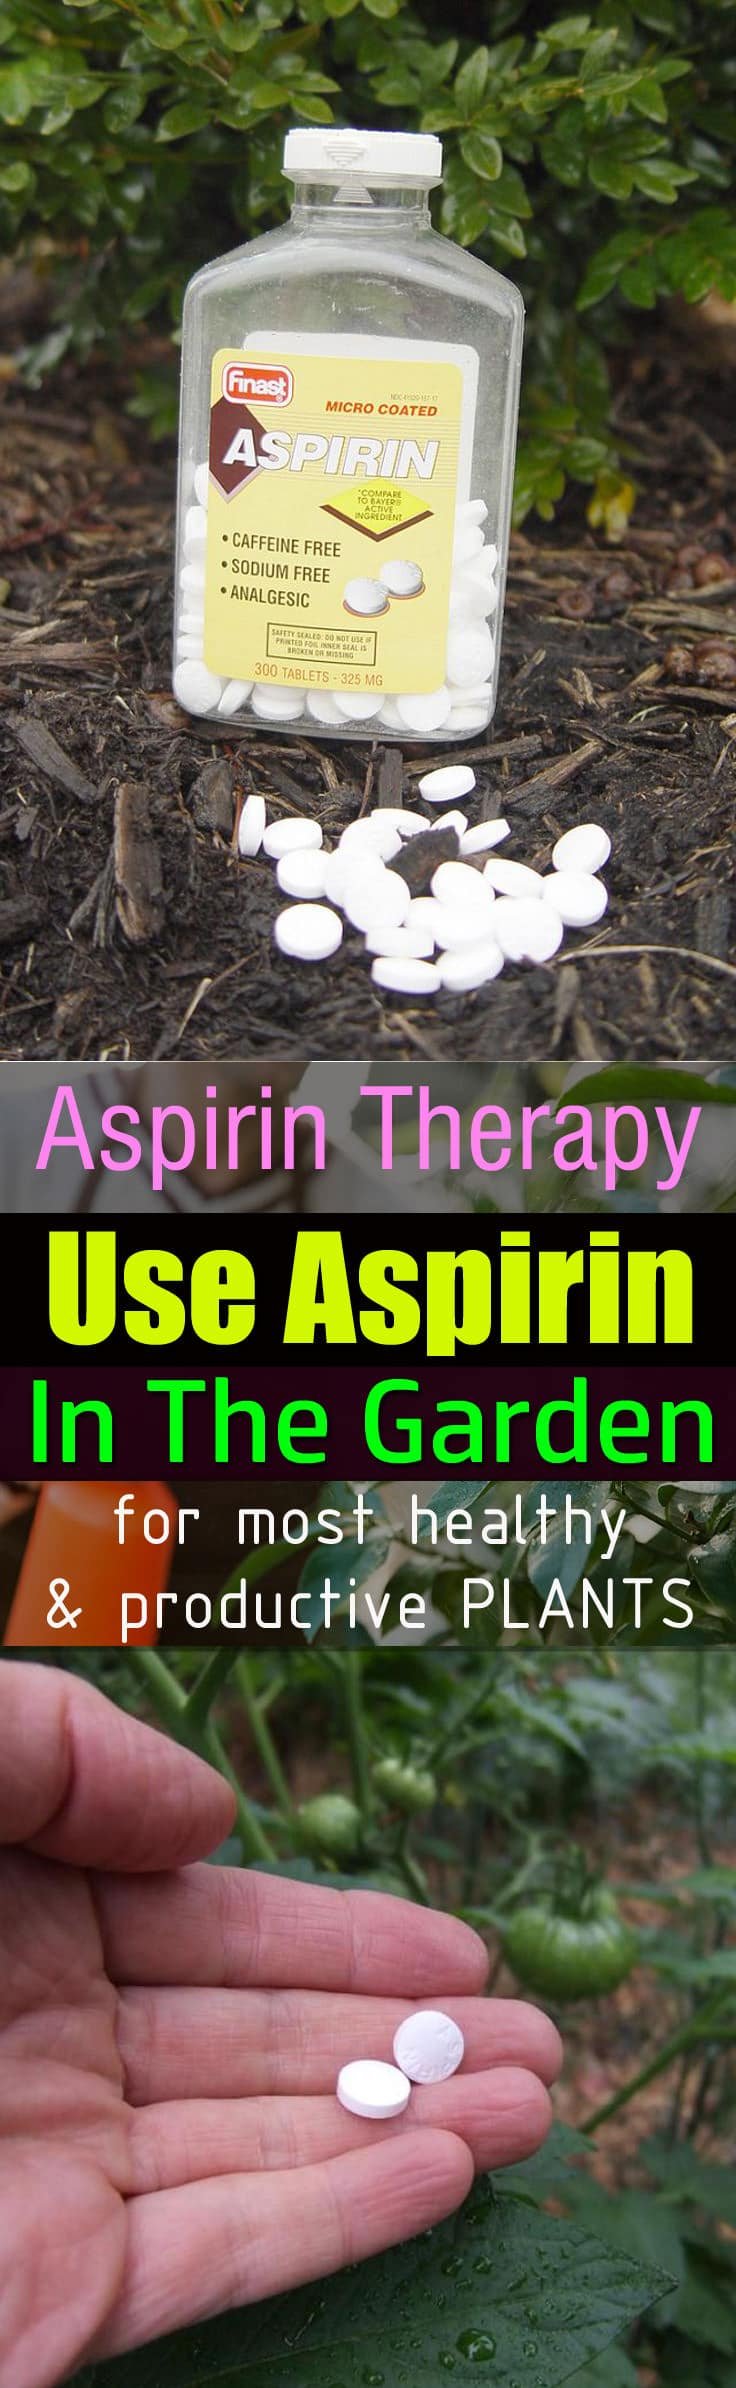 Aspirin tablets can be used for growing healthy and productive plants, and it really WORKS. Here're some of the best ASPIRIN uses in the garden!